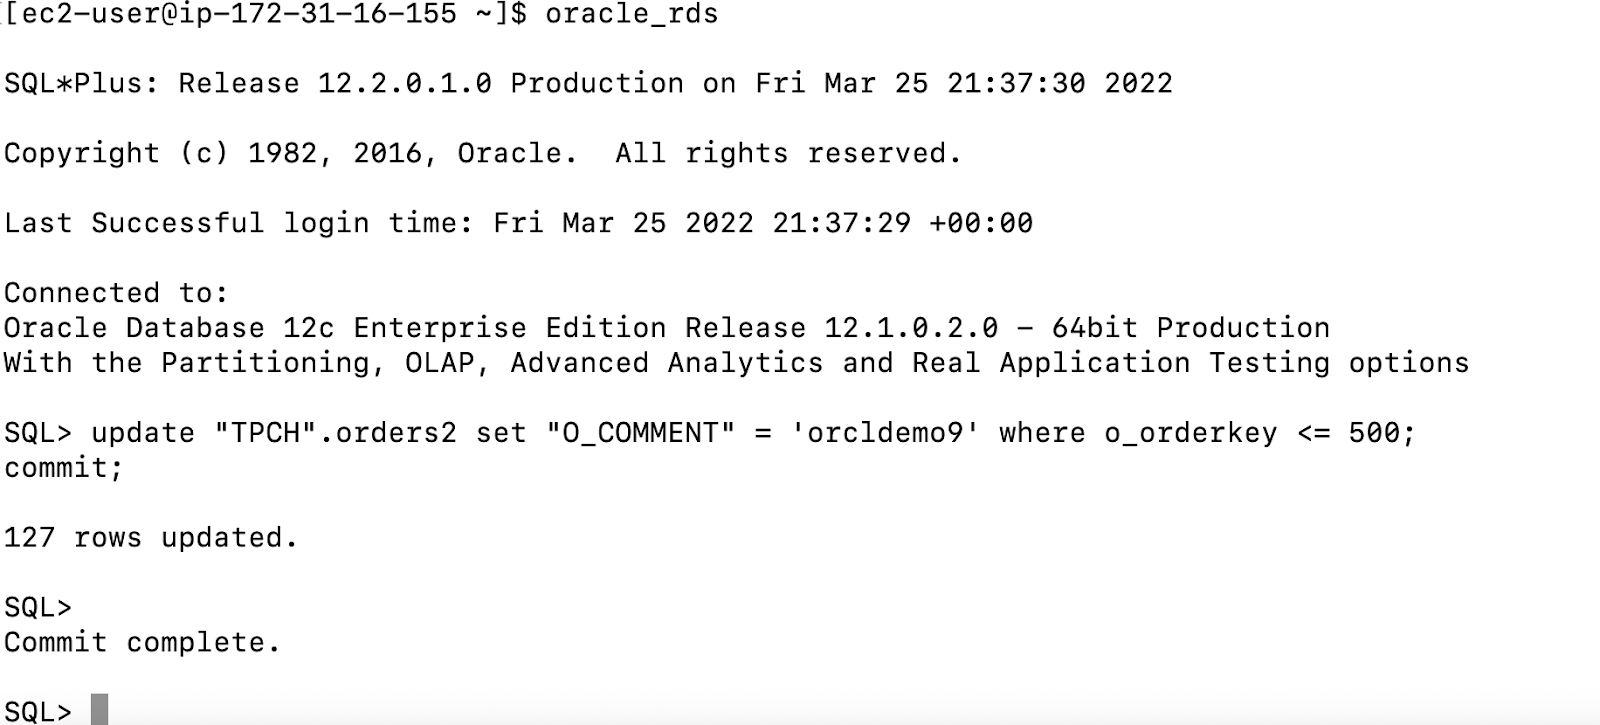 Using SQL to make an update to a table in Oracle